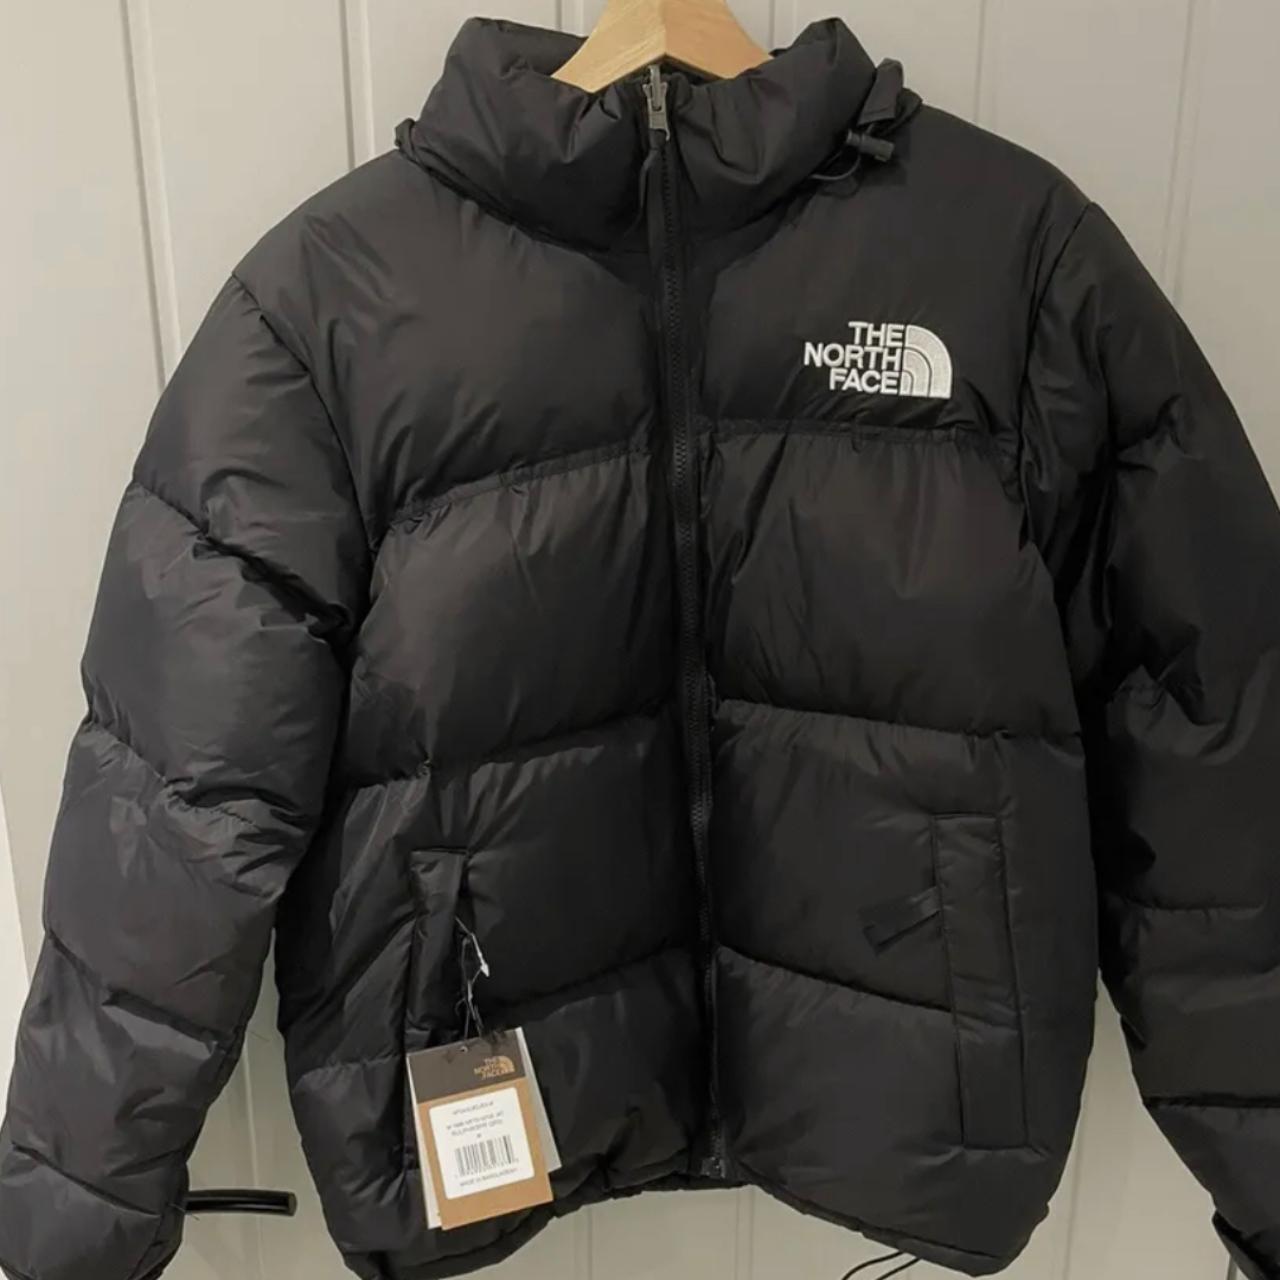 The North Face Puffer Jacket 700 Open to prices... - Depop